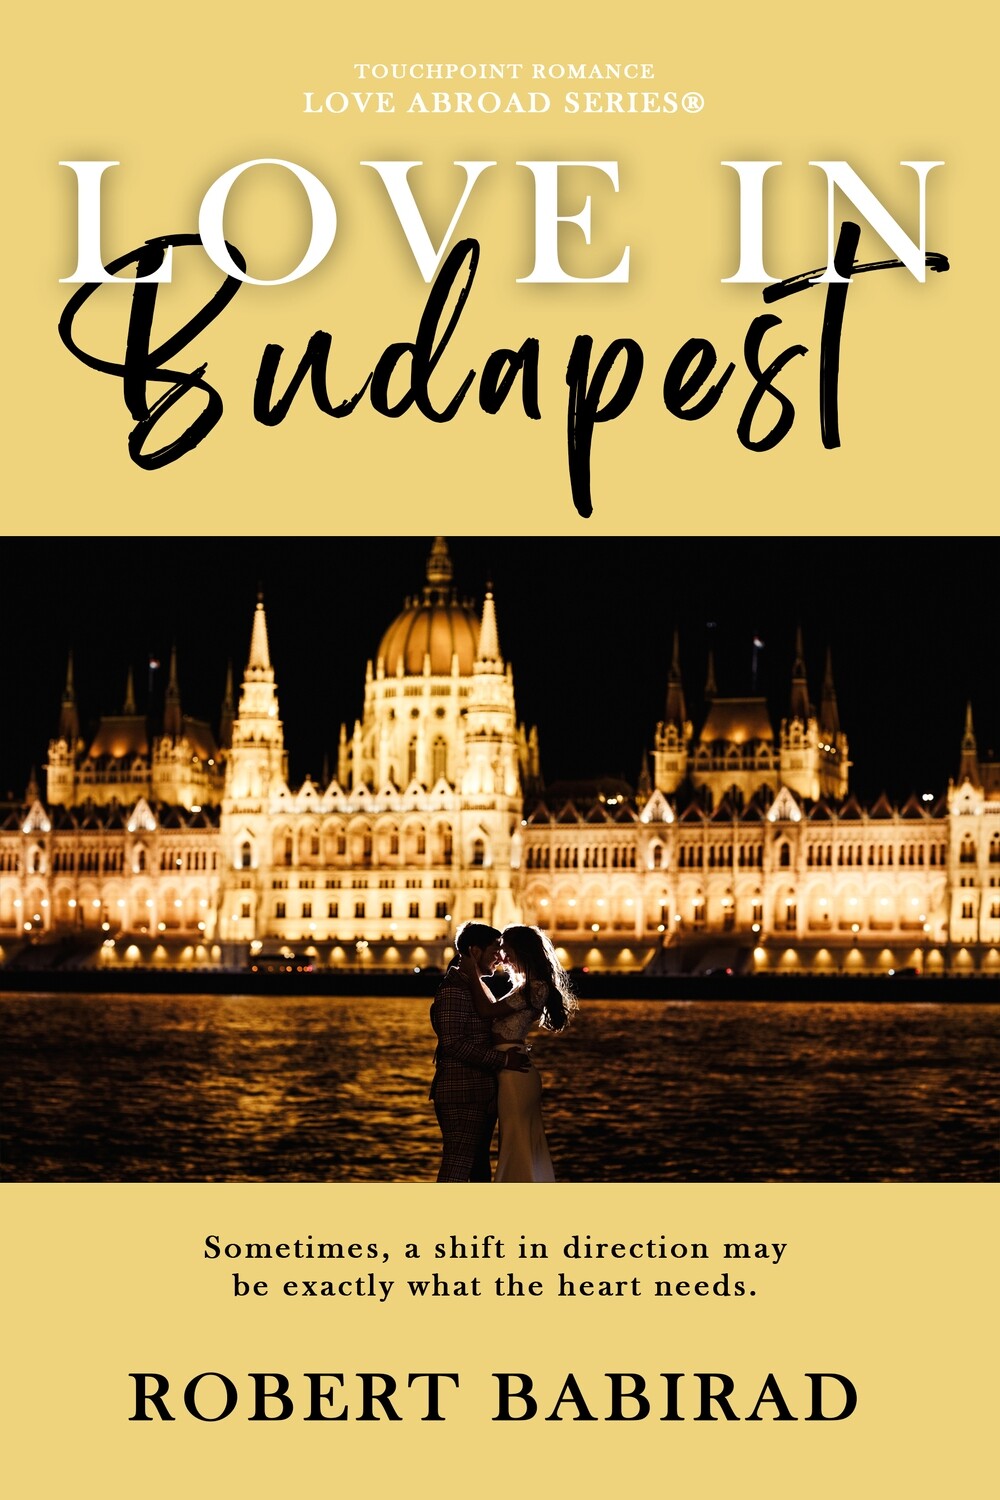 Love in Budapest (a TouchPoint Romance Love Abroad Novel)